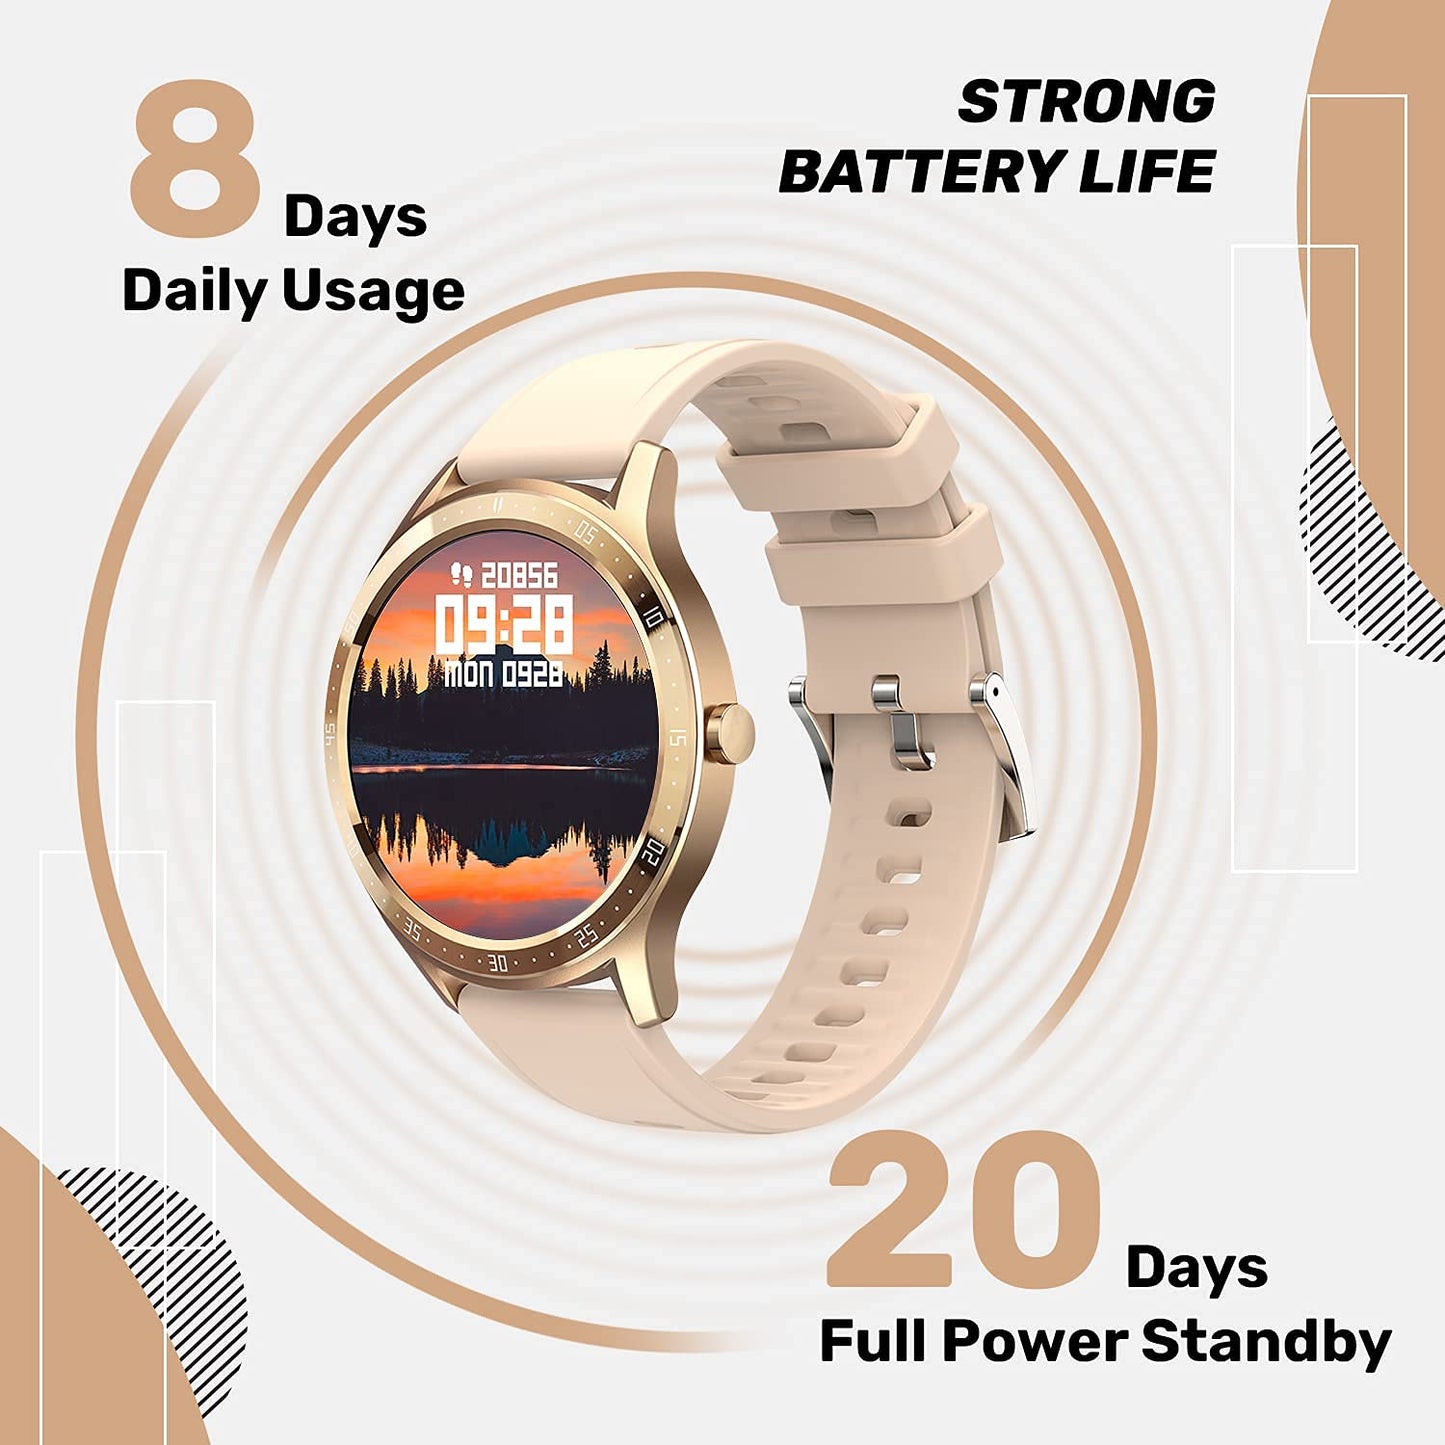 (Refurbished) Fire-Boltt 360 SpO2 Full Touch Large Display Round Smart Watch with in-Built Games, 8 Days Battery Life, IP67 Water Resistant with Blood Oxygen and Heart Rate Monitoring (Gold) (BSW003)